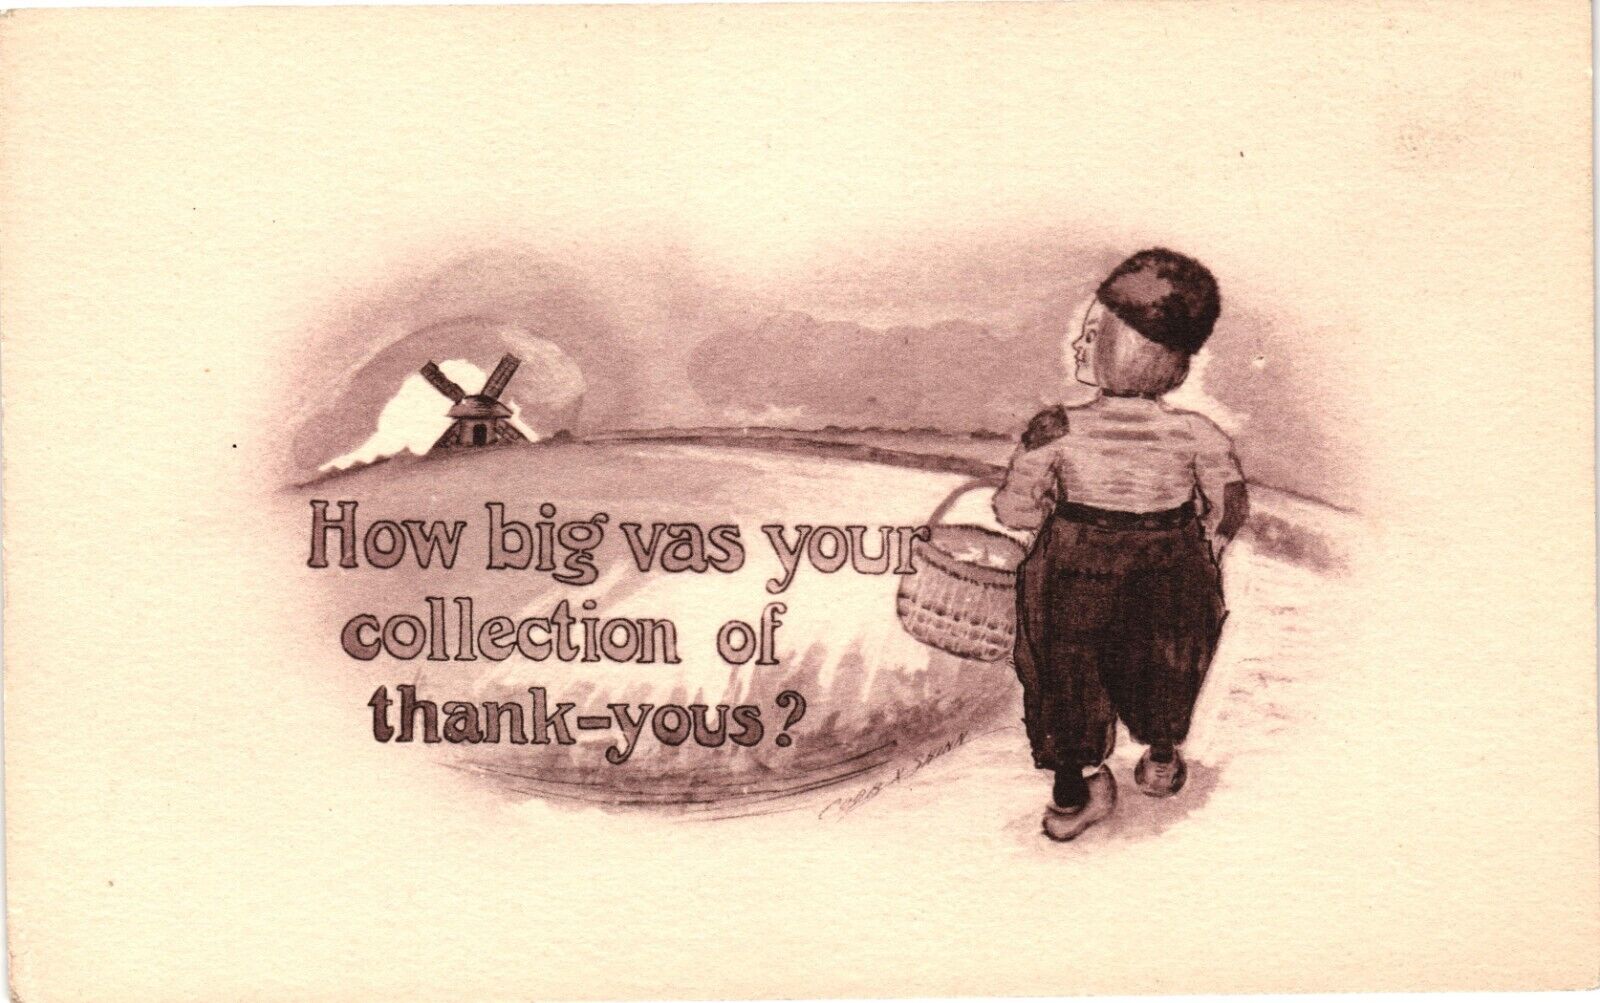 Cartoon Dutch Boy Windmill Collection of Thank-You Divided Postcard Unused c1913